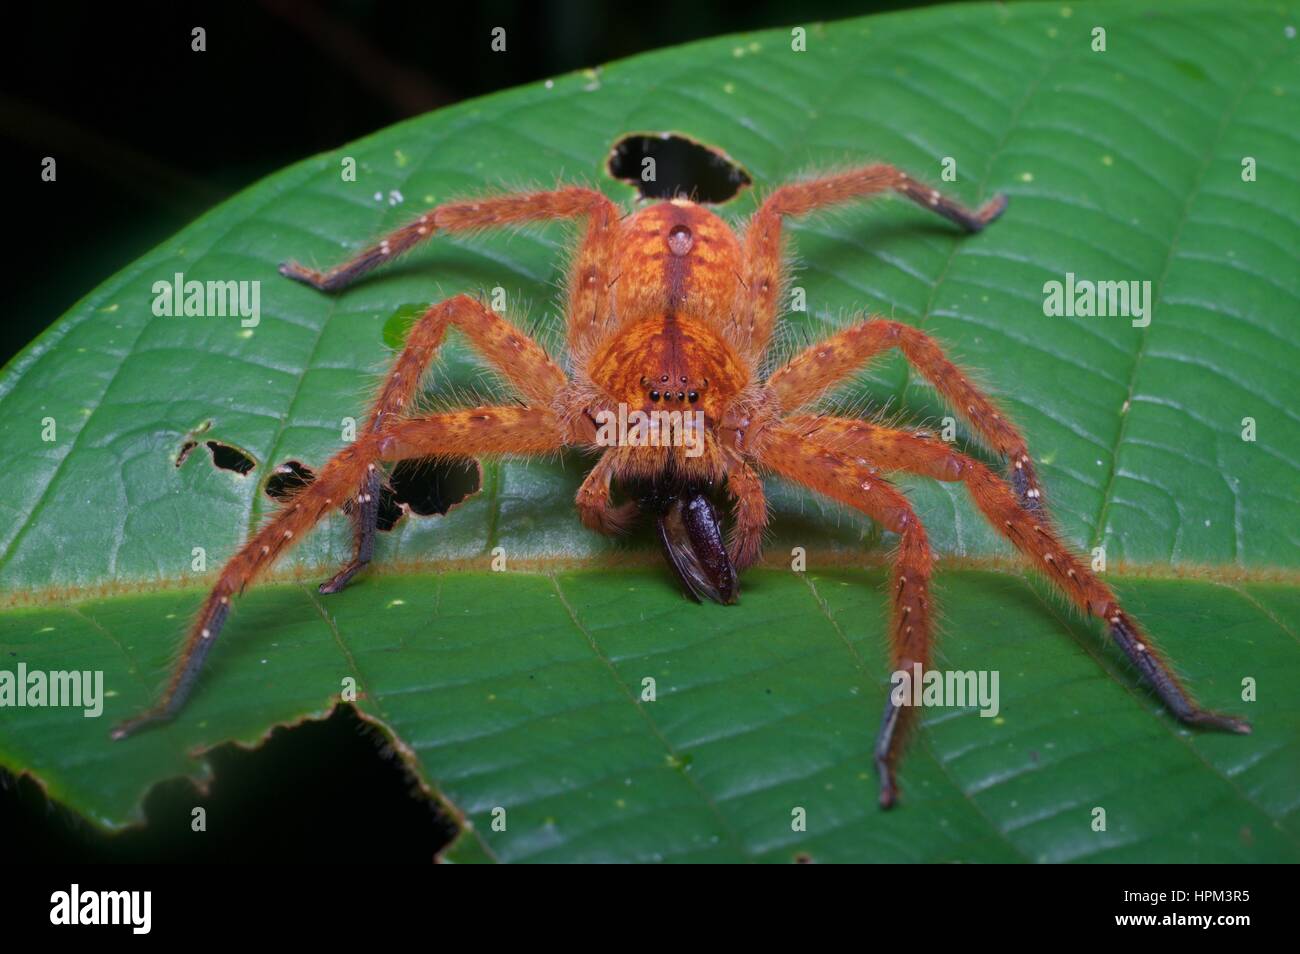 A David Bowie Spider (Heteropoda davidbowie) having a meal on a leaf in the rainforest in Santubong National Park, Sarawak, East Malaysia, Borneo Stock Photo